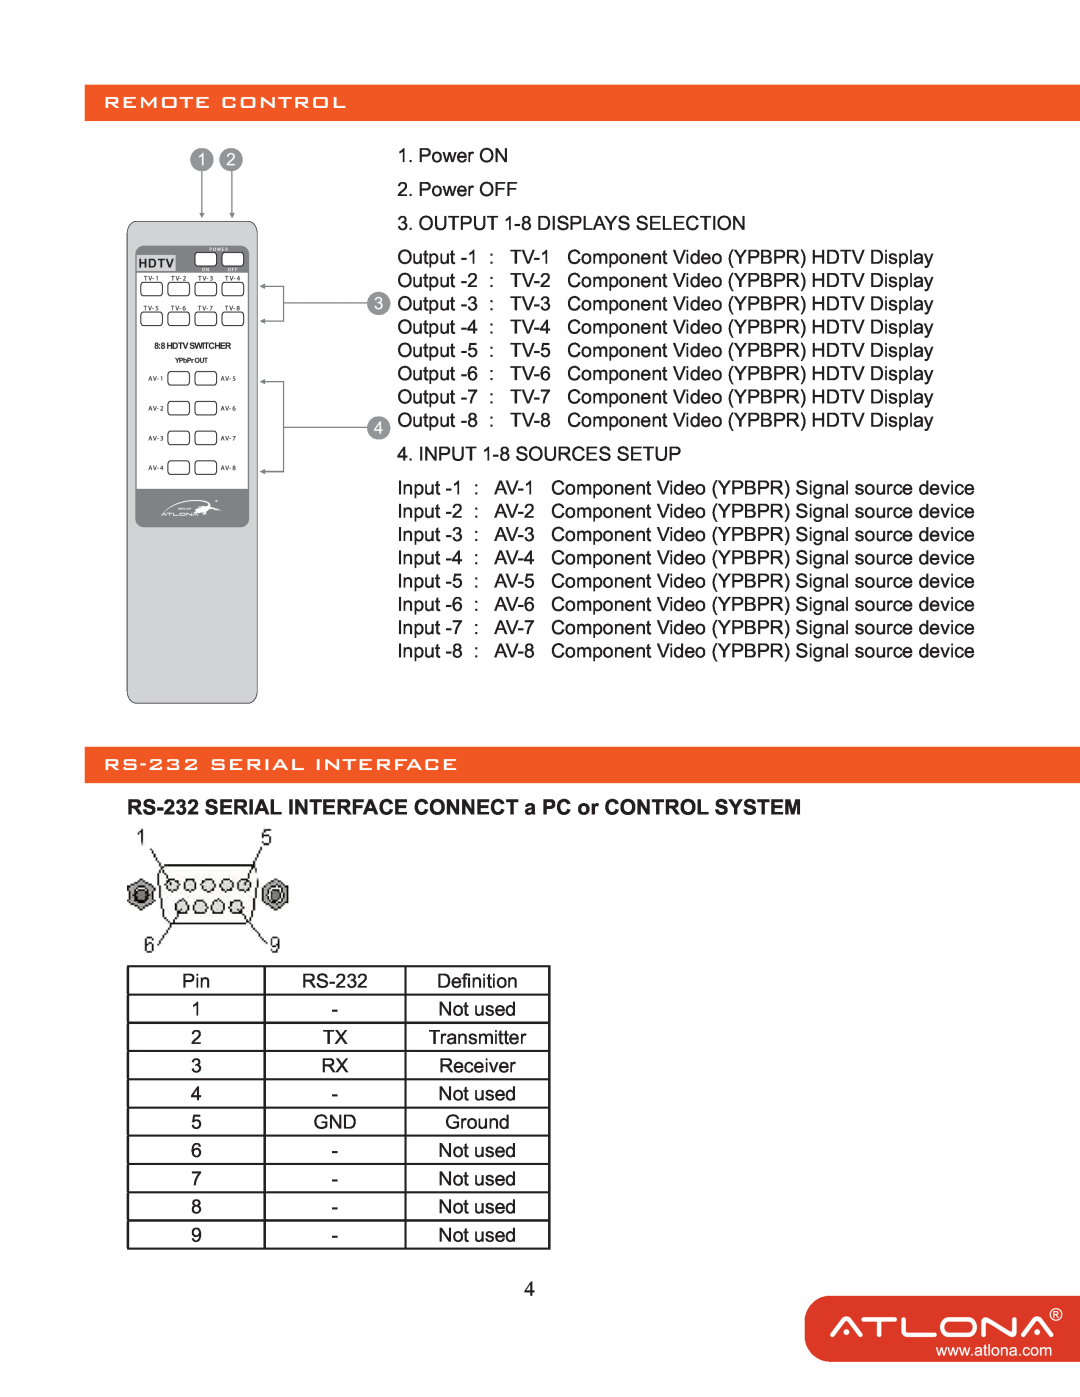 Atlona AT-COMP-88M user manual Remote Control, RS-232 SERIAL INTERFACE CONNECT a PC or CONTROL SYSTEM 